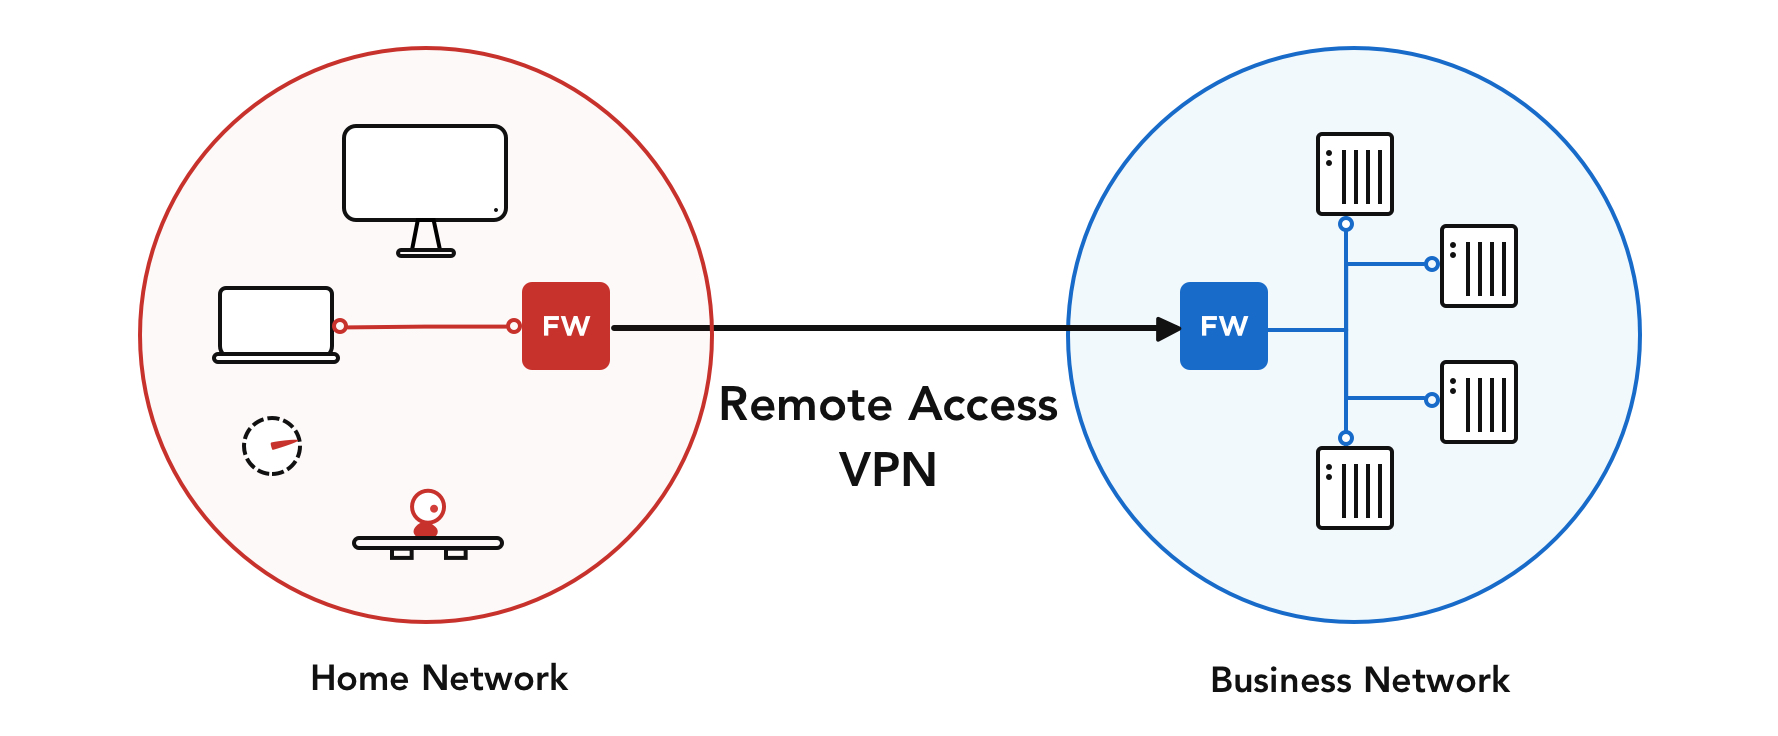 Multiple firewalla devices can setup remote access VPN from home to business networks